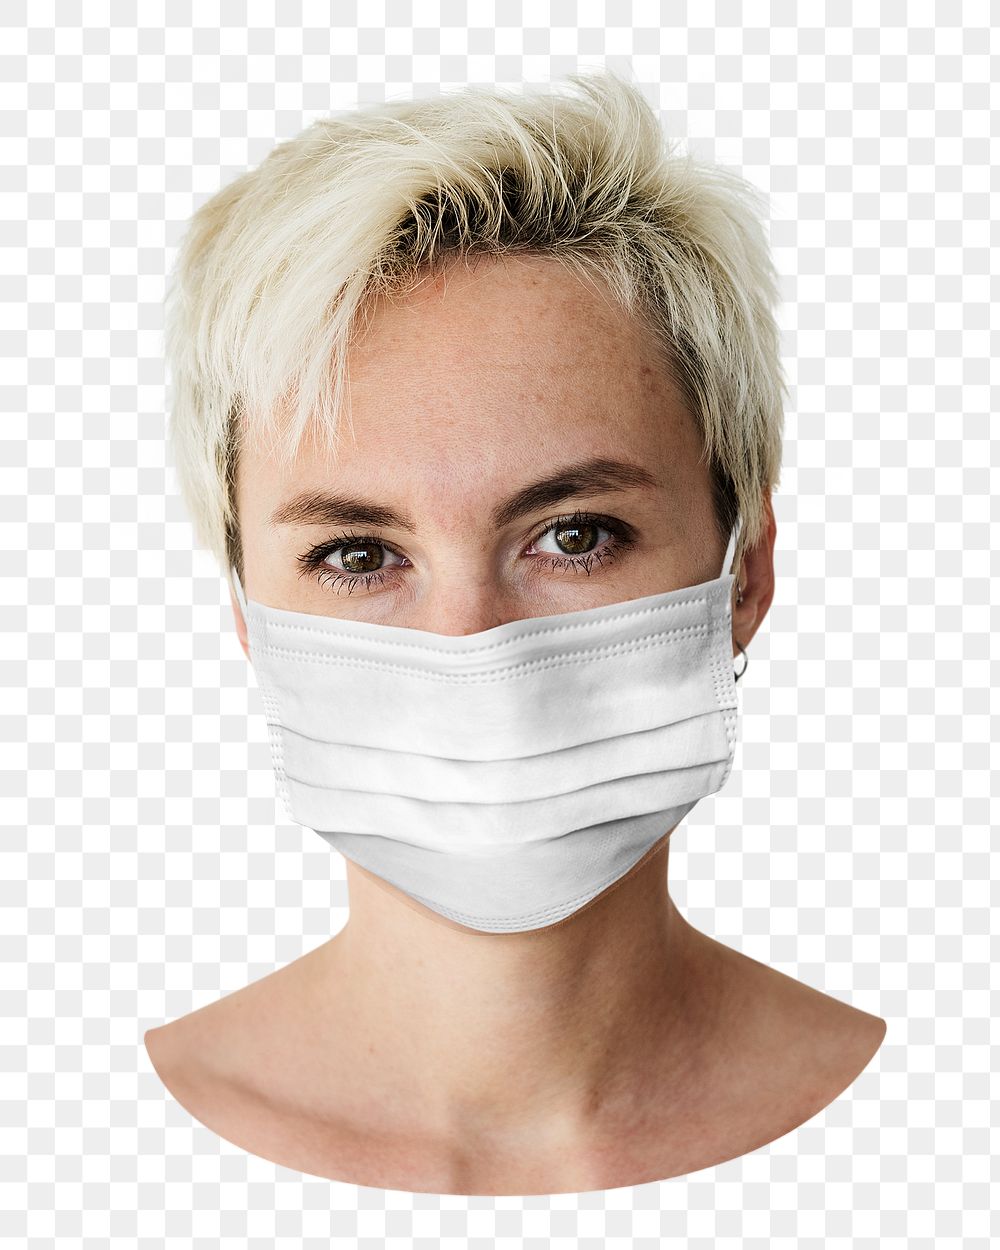 Blonde woman png wearing face mask, transparent background